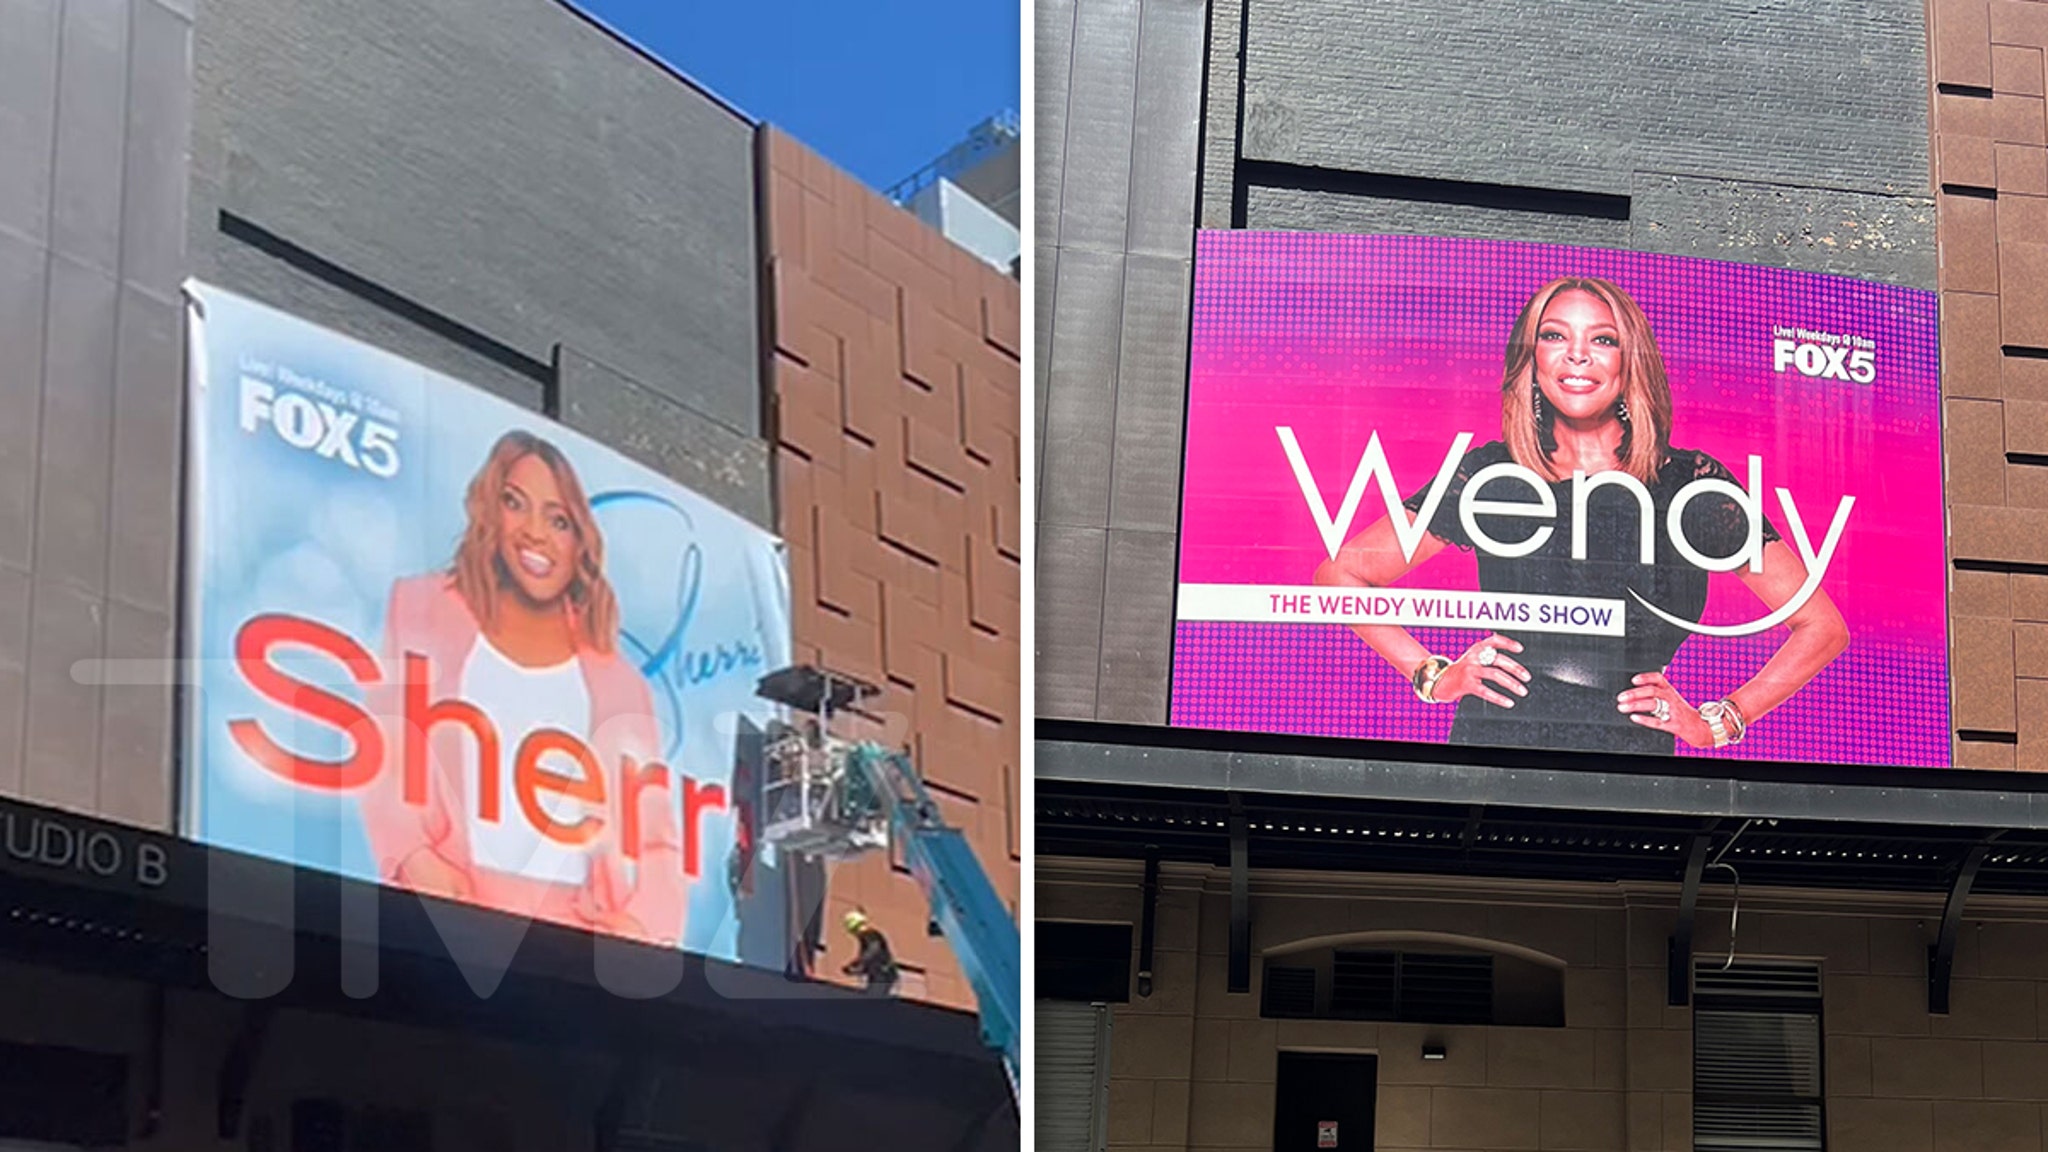 Poster for Sherri Shepherd’s New Show Replaces Wendy Williams’ Poster